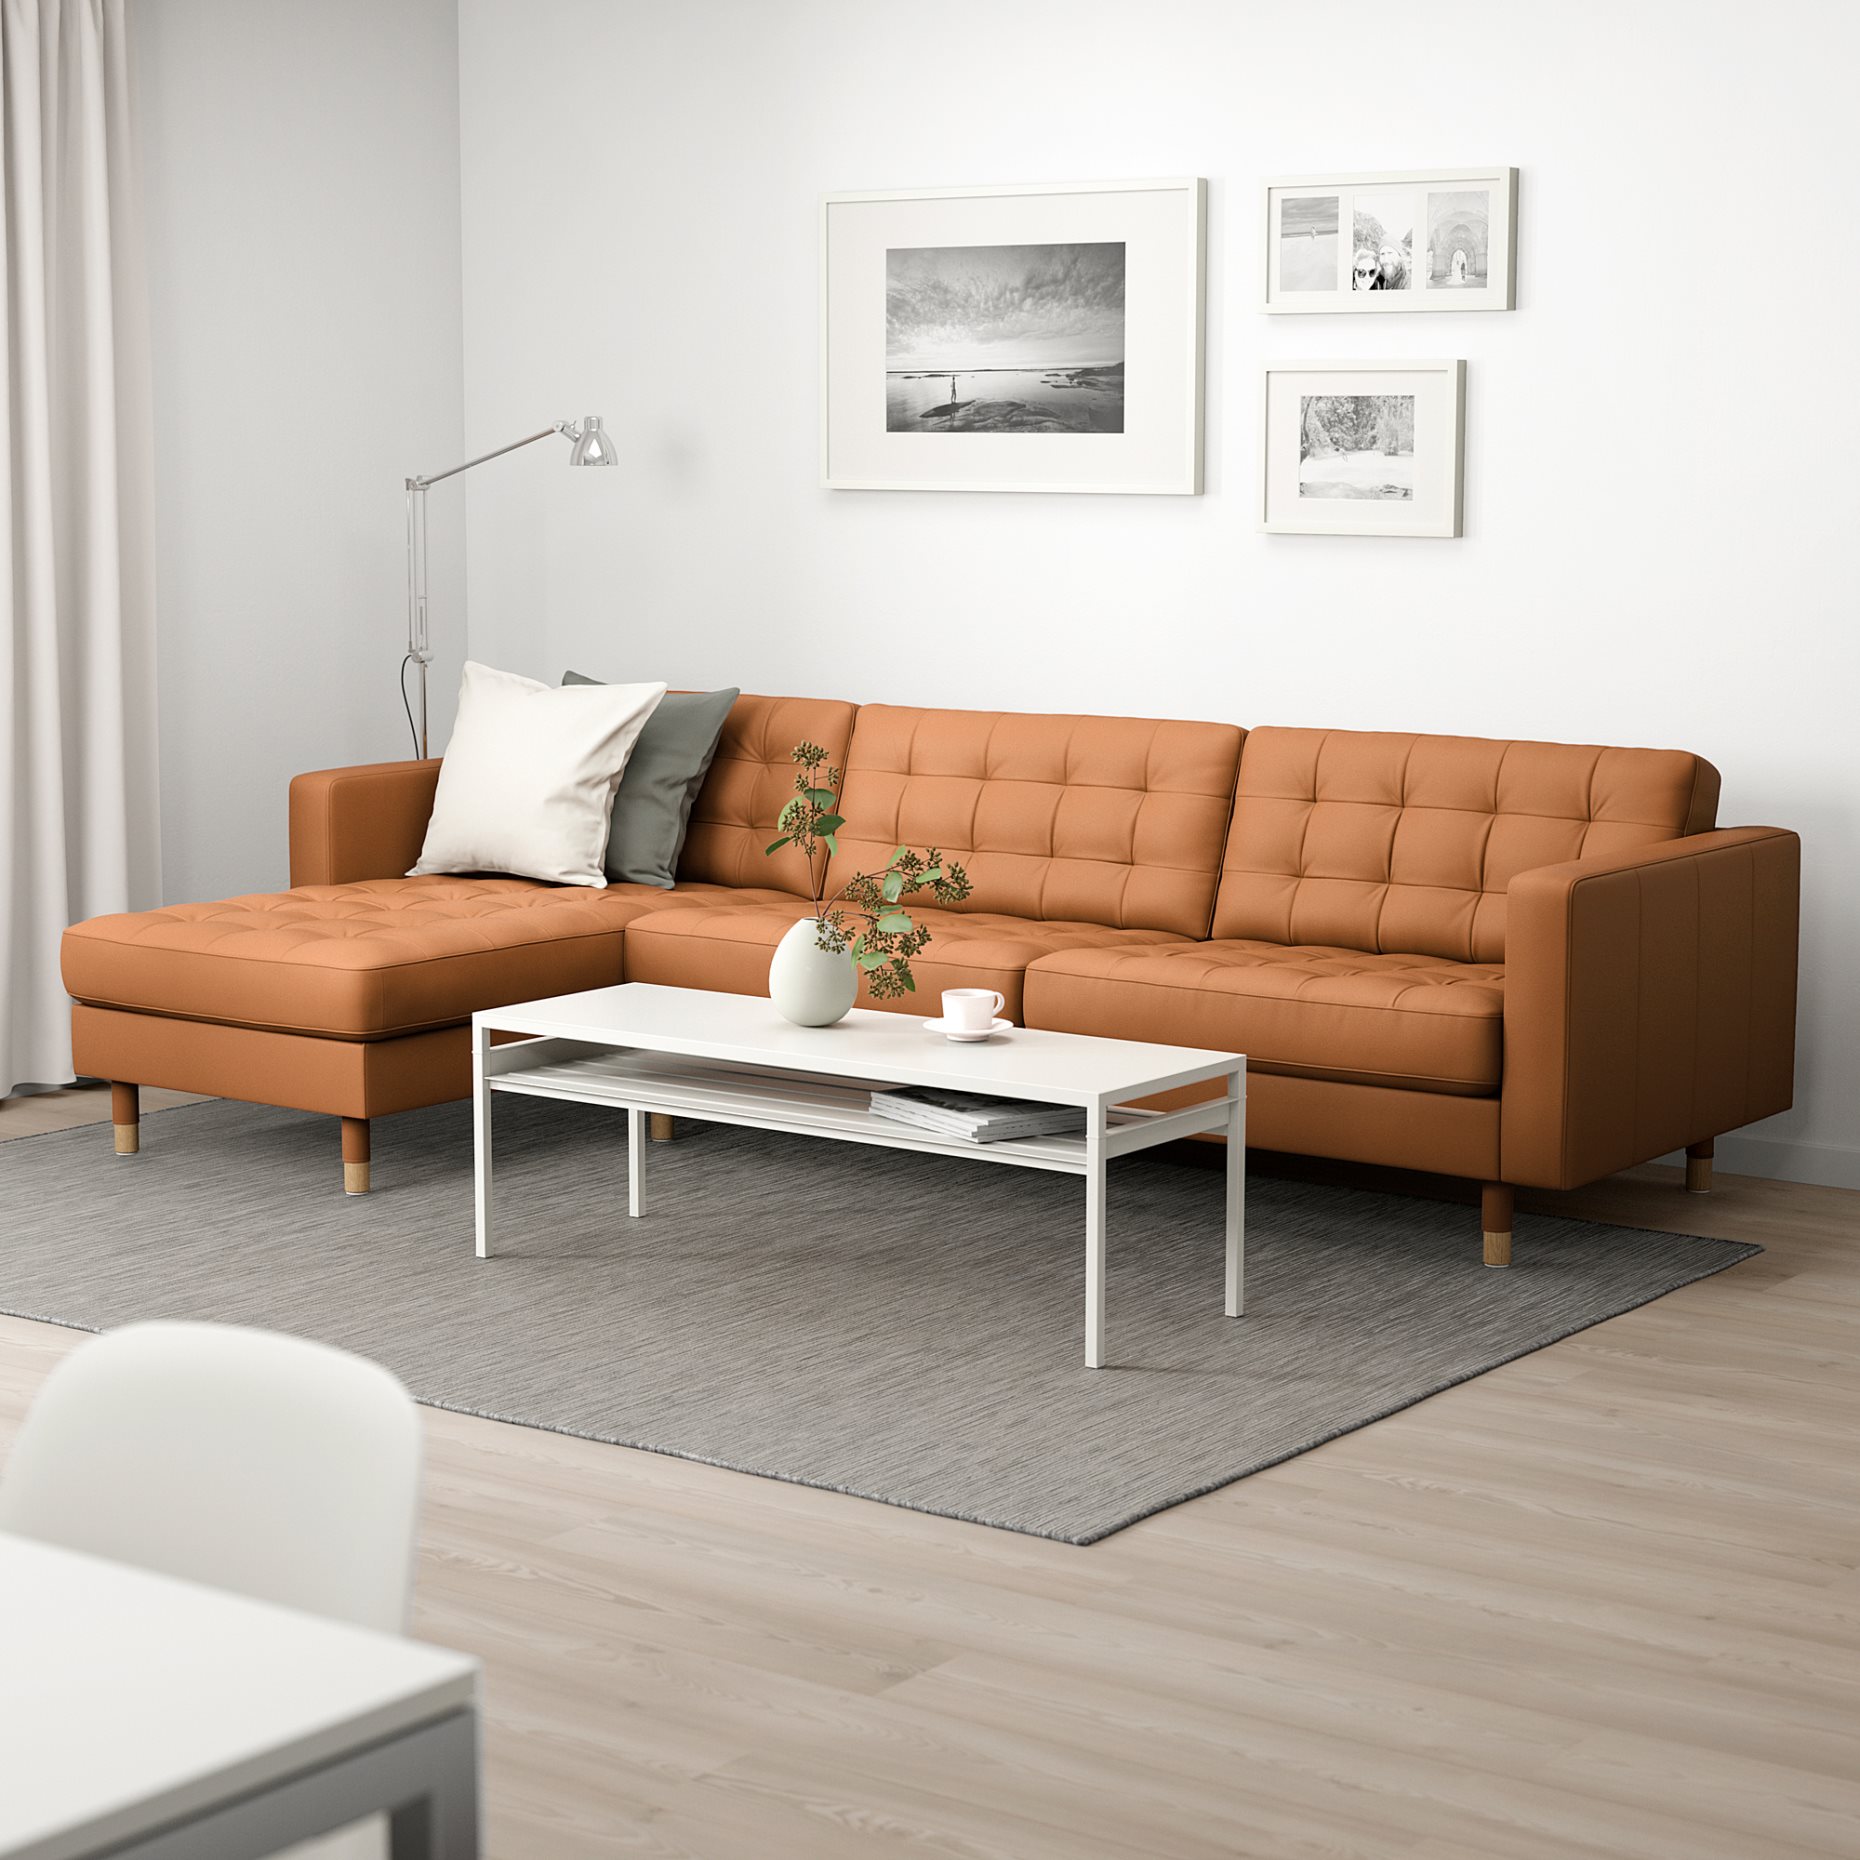 LANDSKRONA, 4-seat sofa with chaise longue, 592.703.54